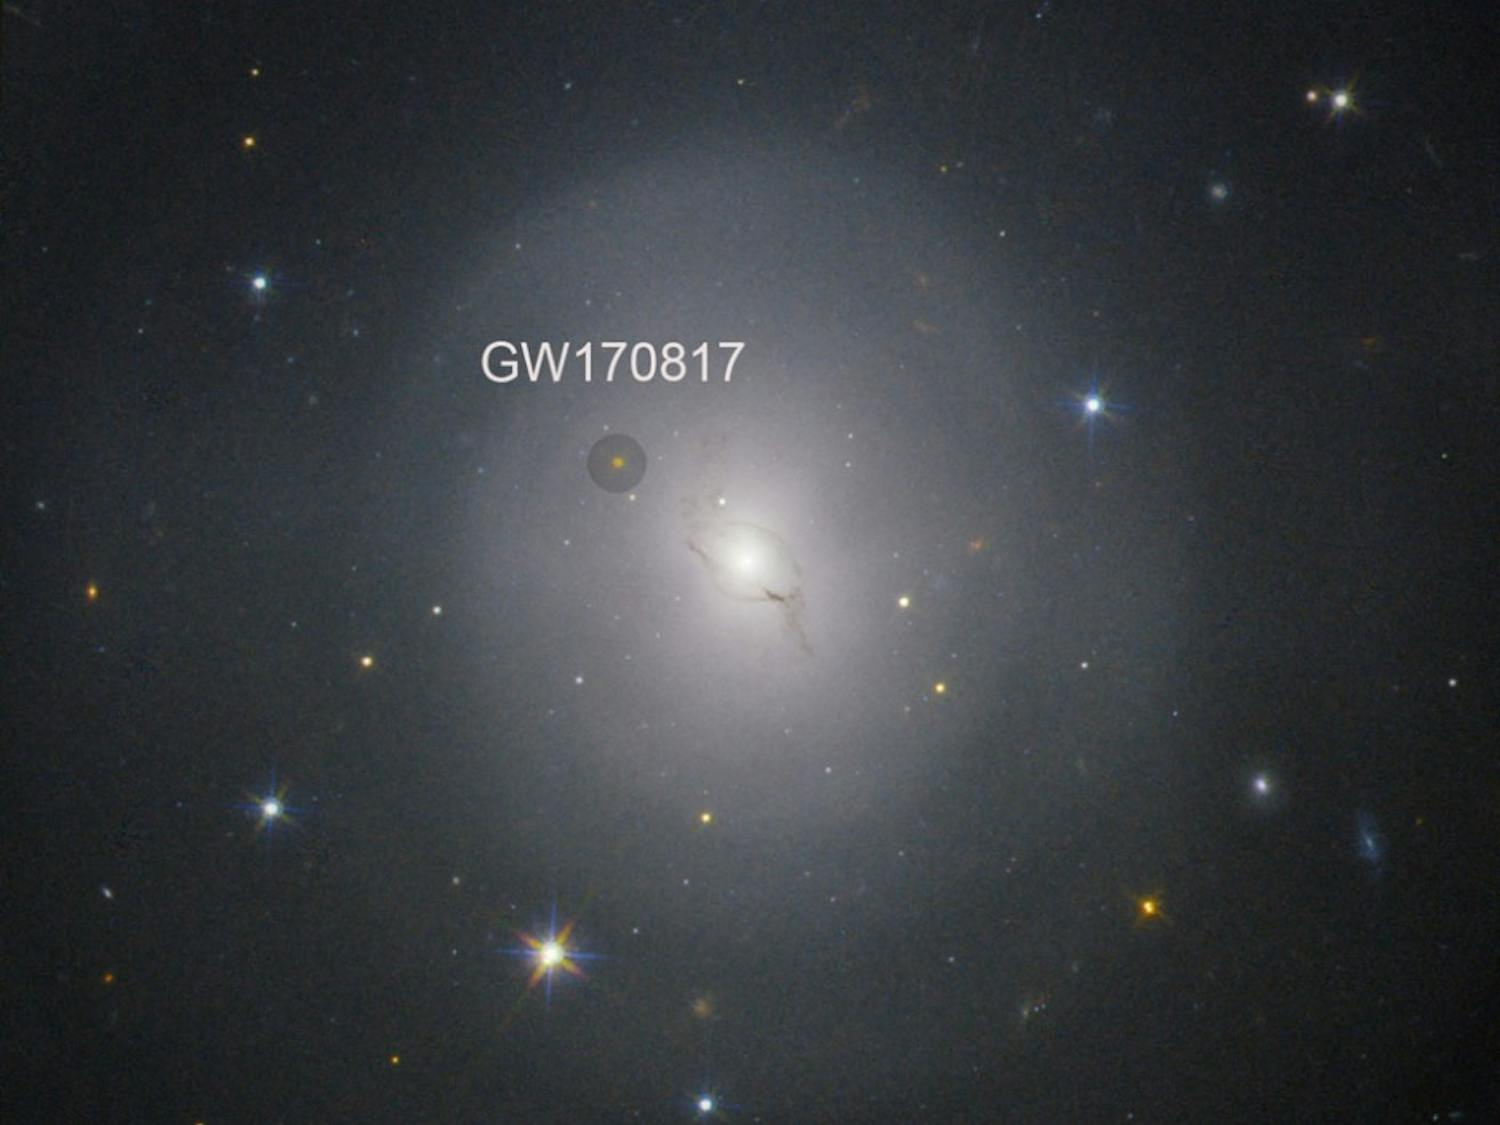 NGC4993_Hubble_960_annotated.jpg